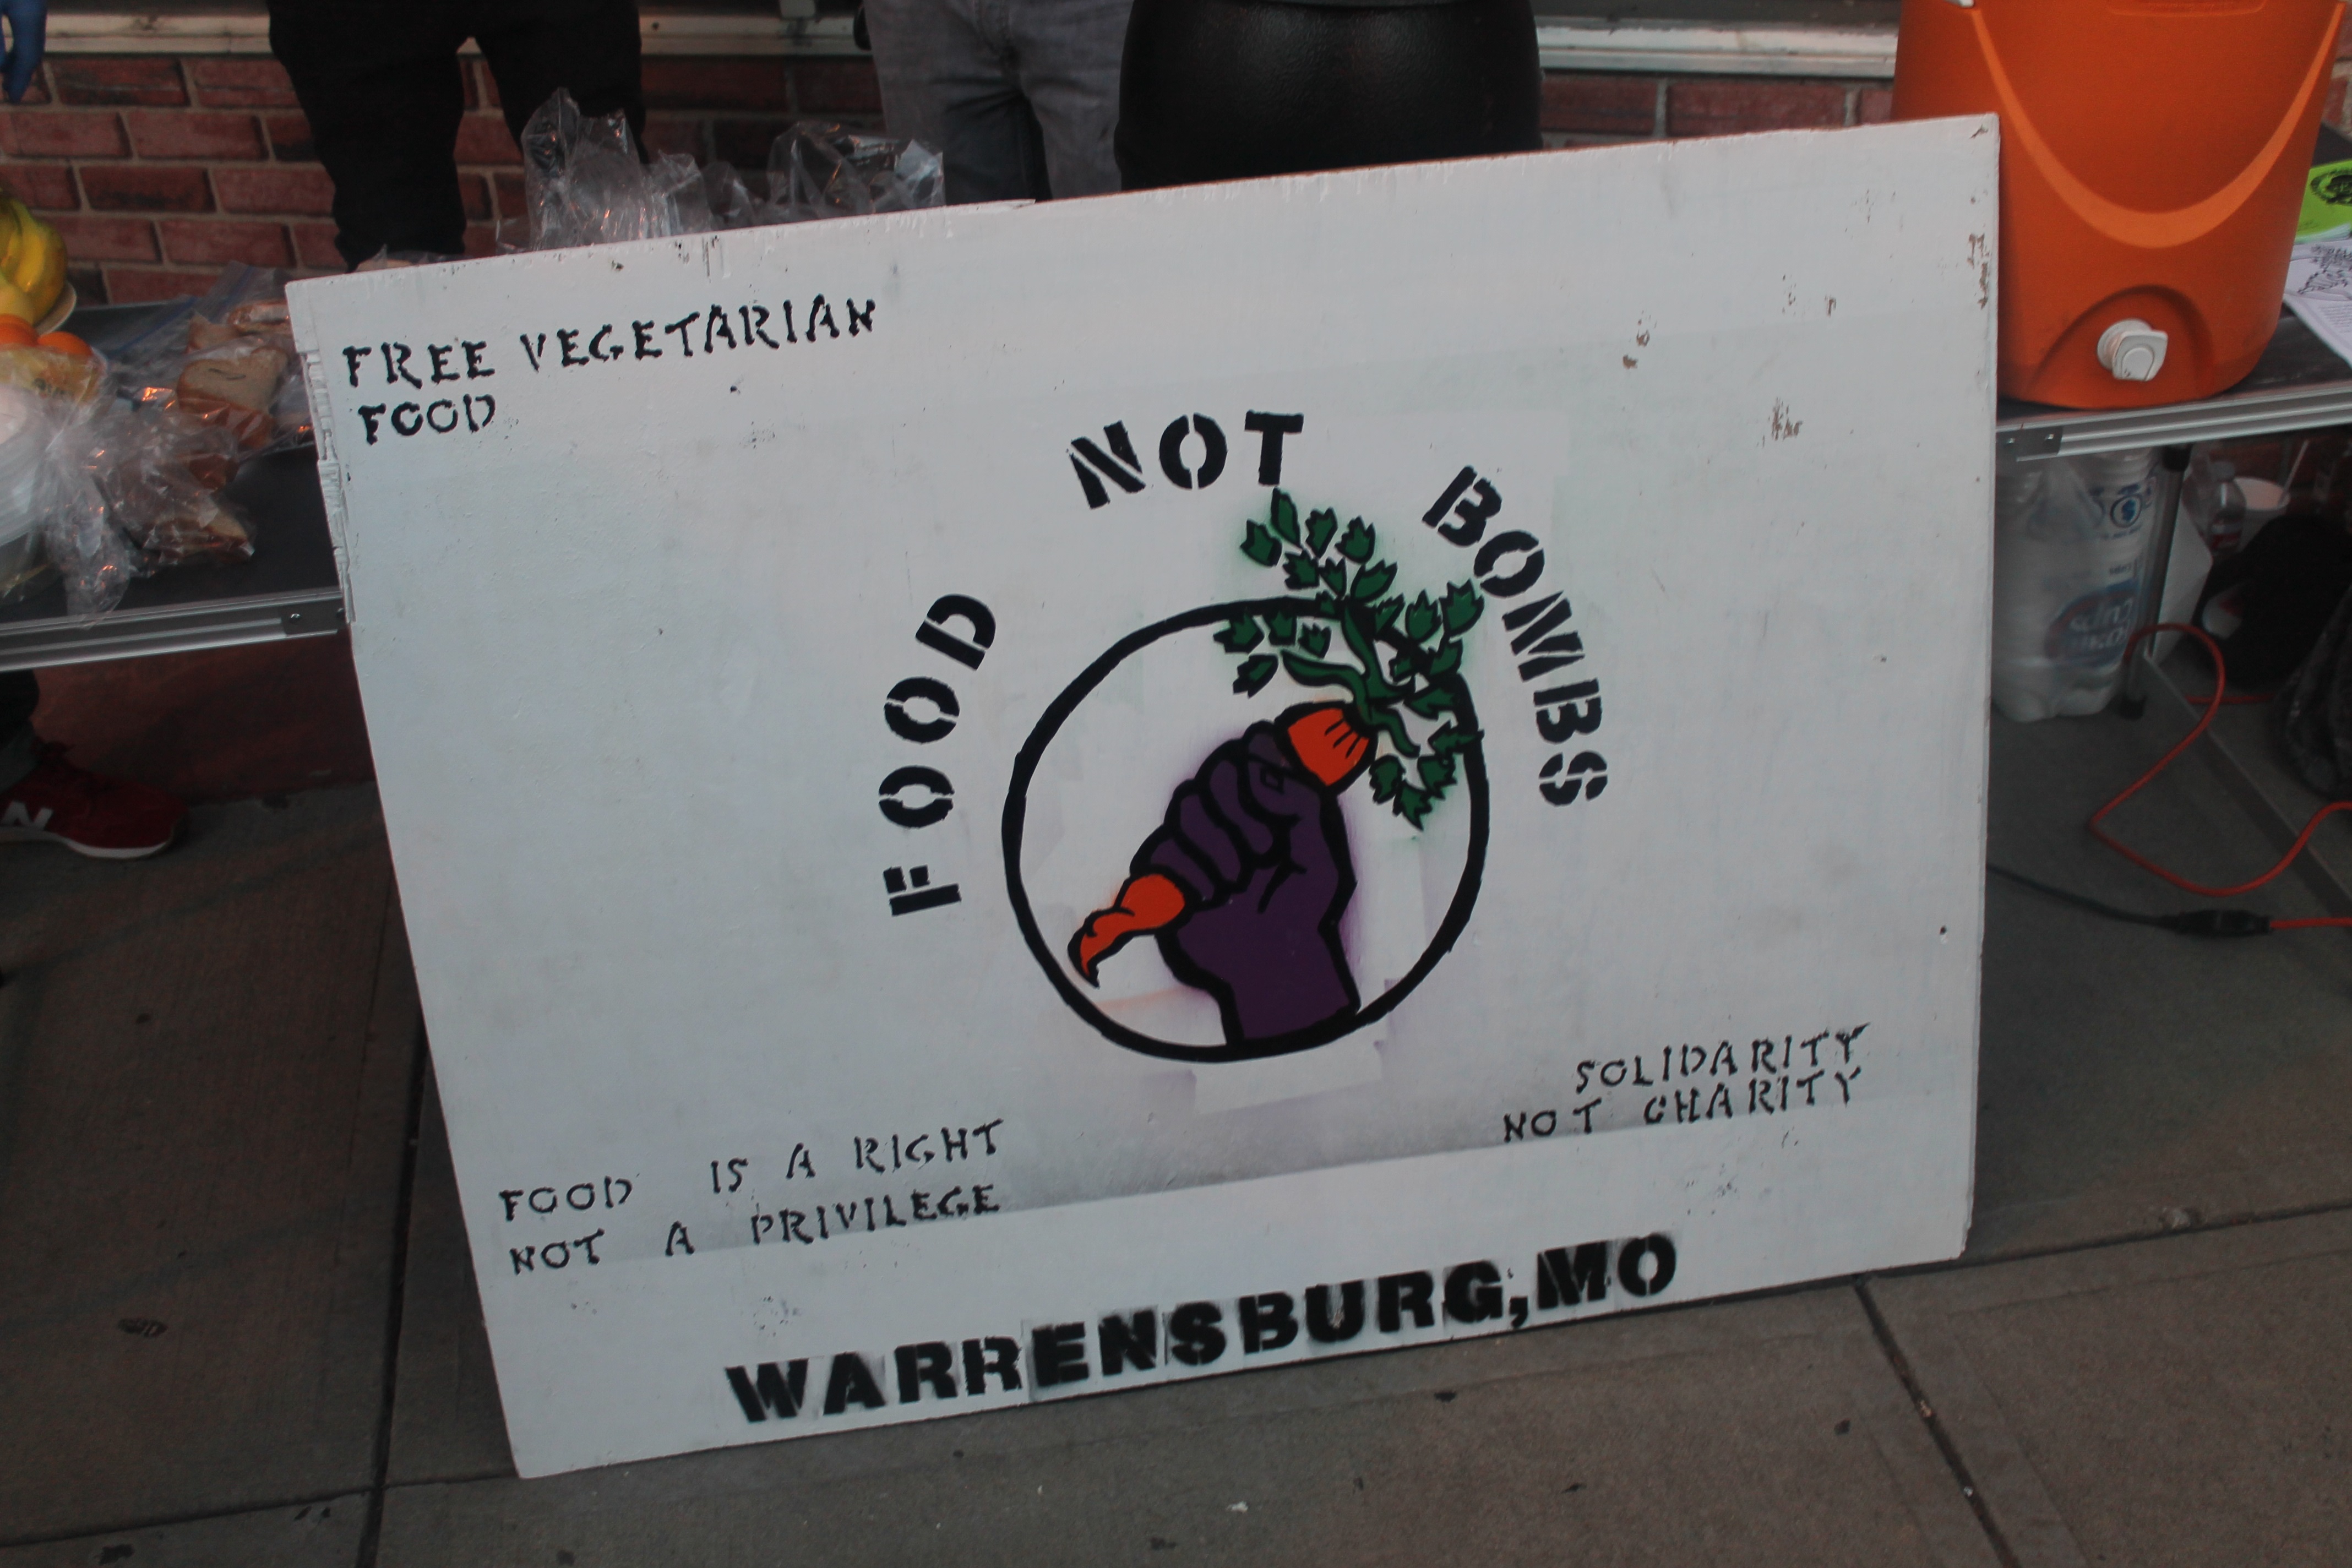 Food Not Bombs comes to Warrensburg